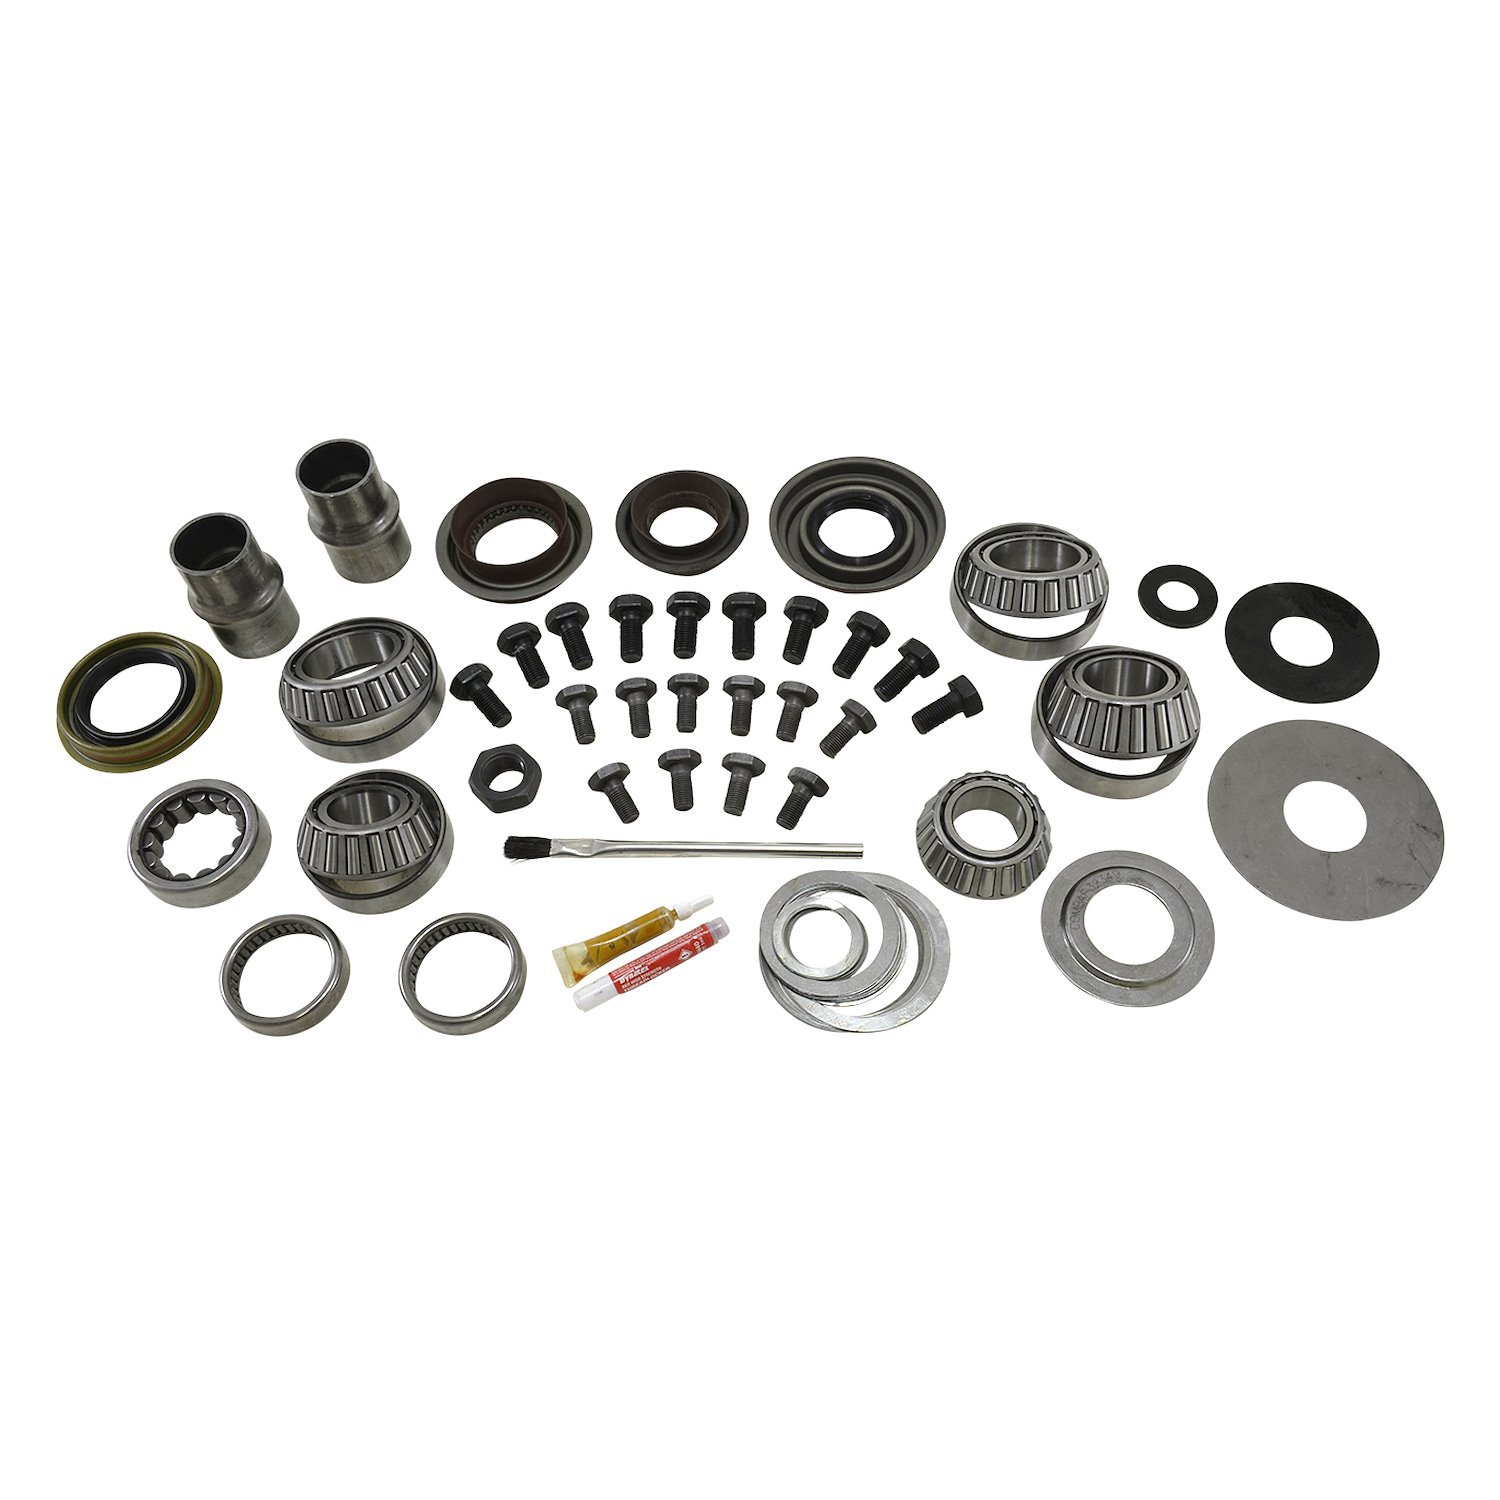 Master Overhaul Kit Jeep Liberty Dana "Super" 30 Front  Differential